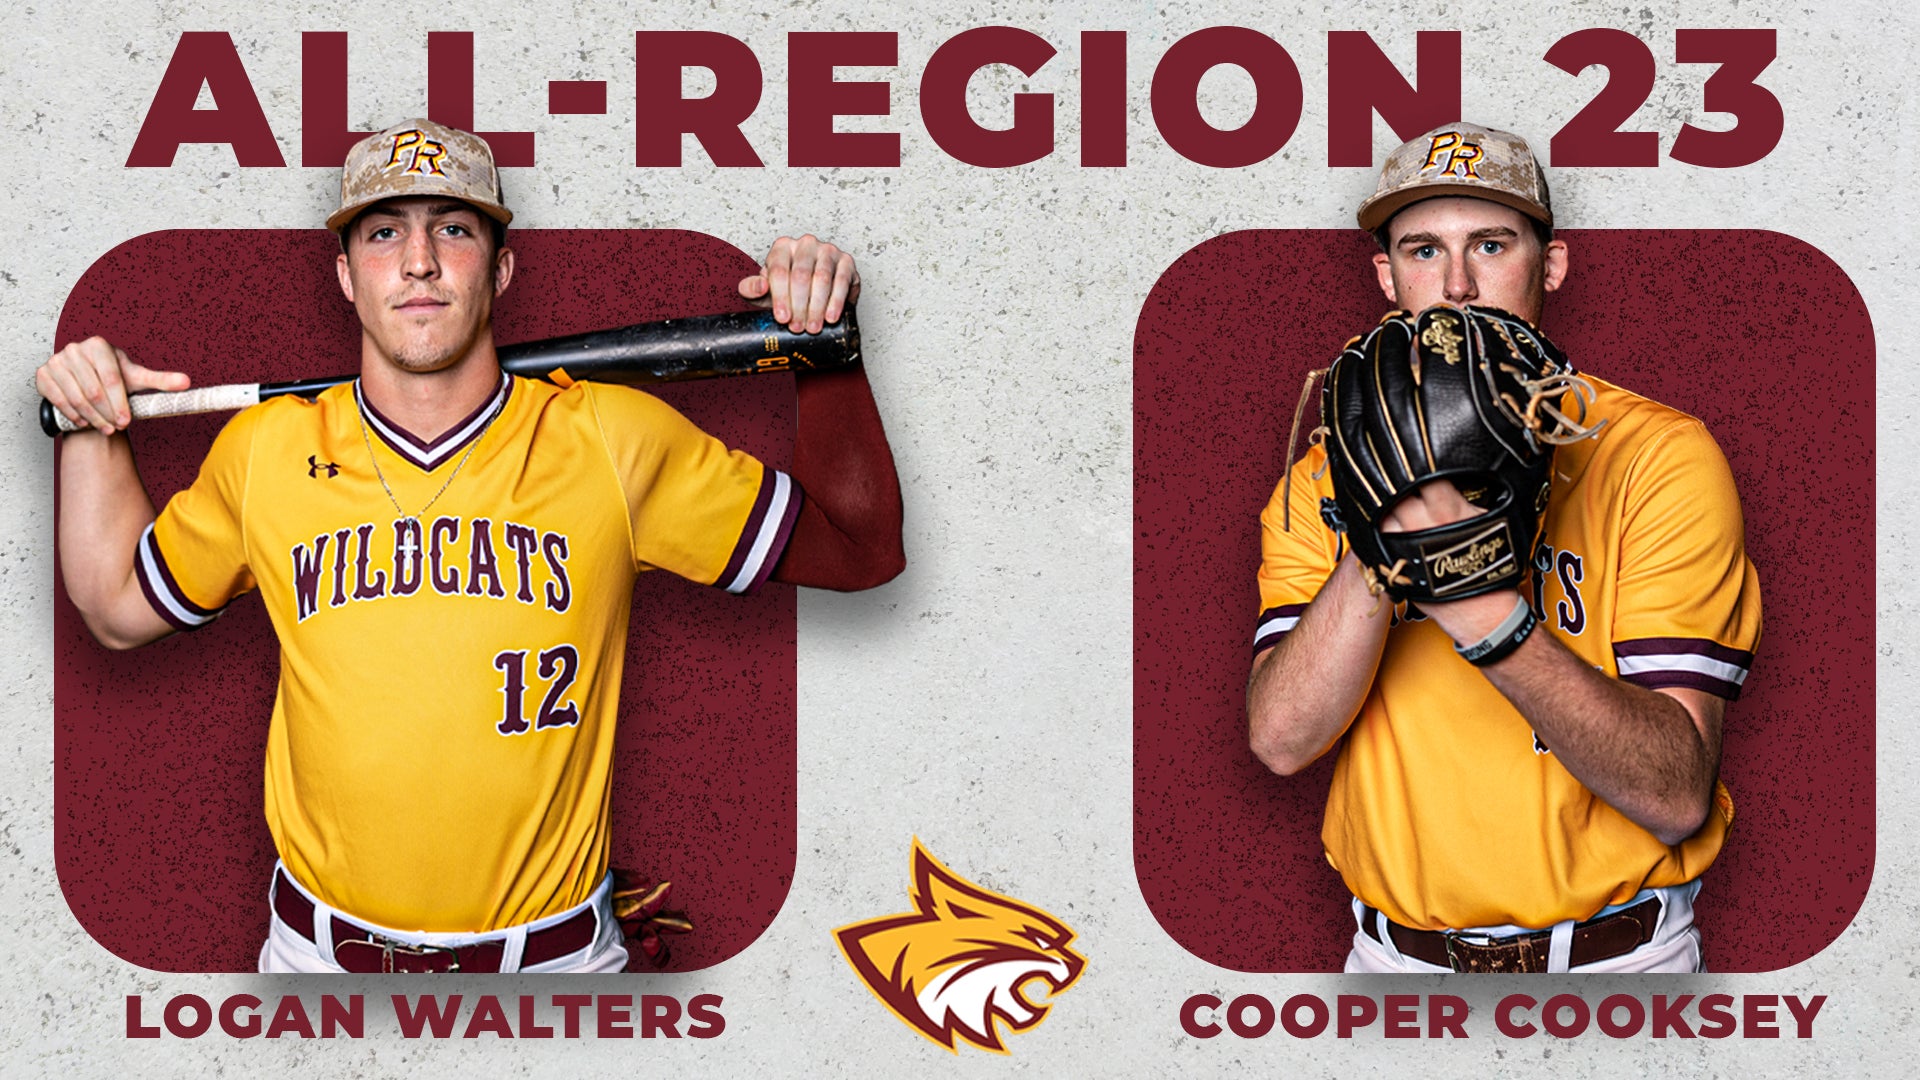 PRCC's Cooper Cooksey and Logan Walters named All-Region 23 - Picayune ...